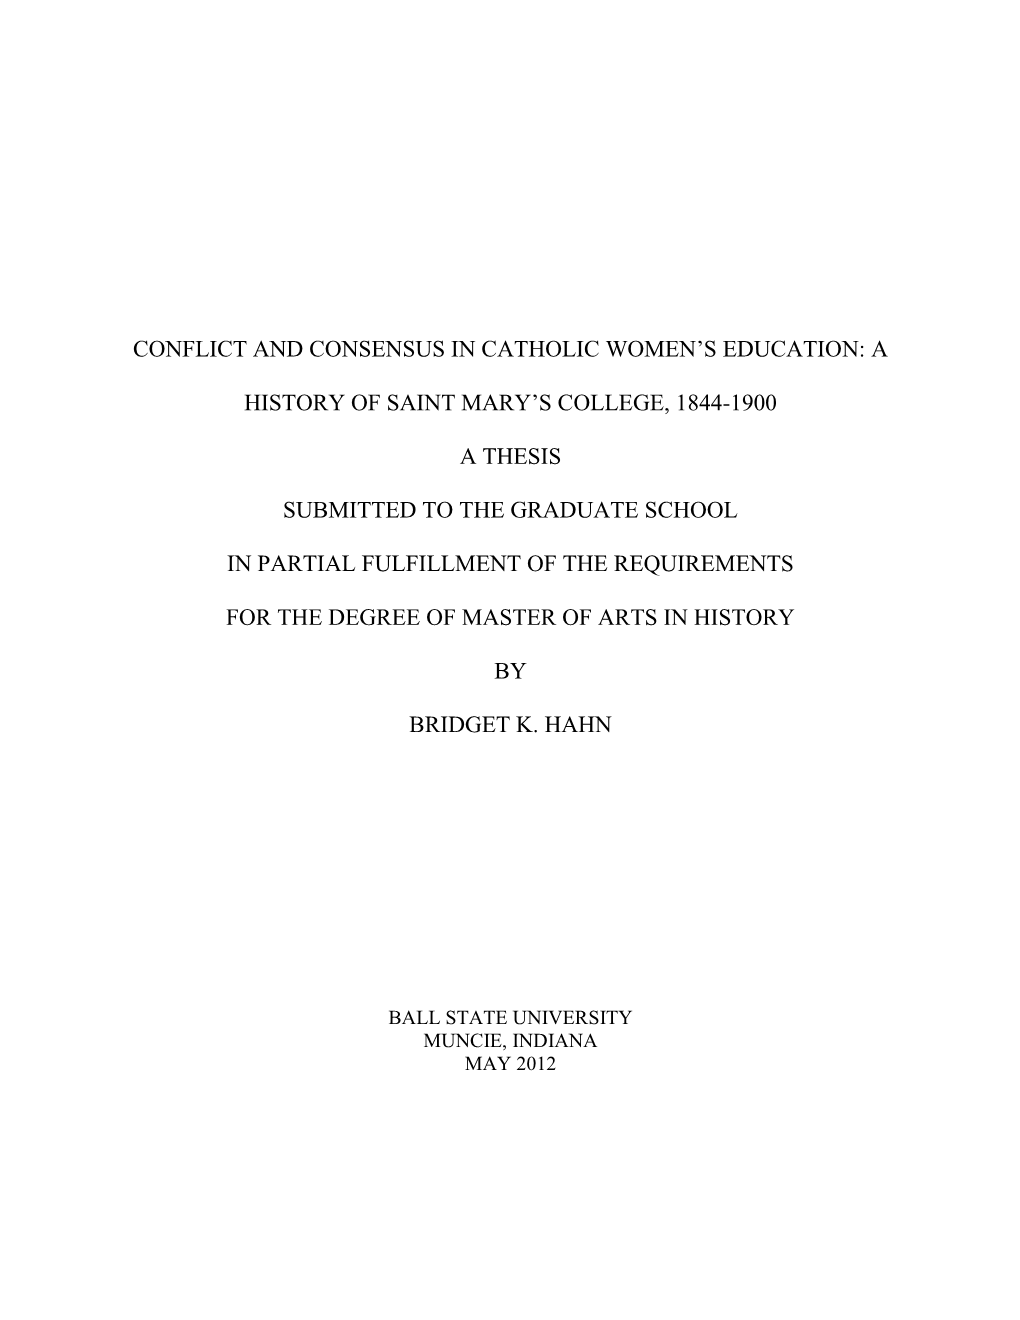 Conflict and Consensus in Catholic Women's Education